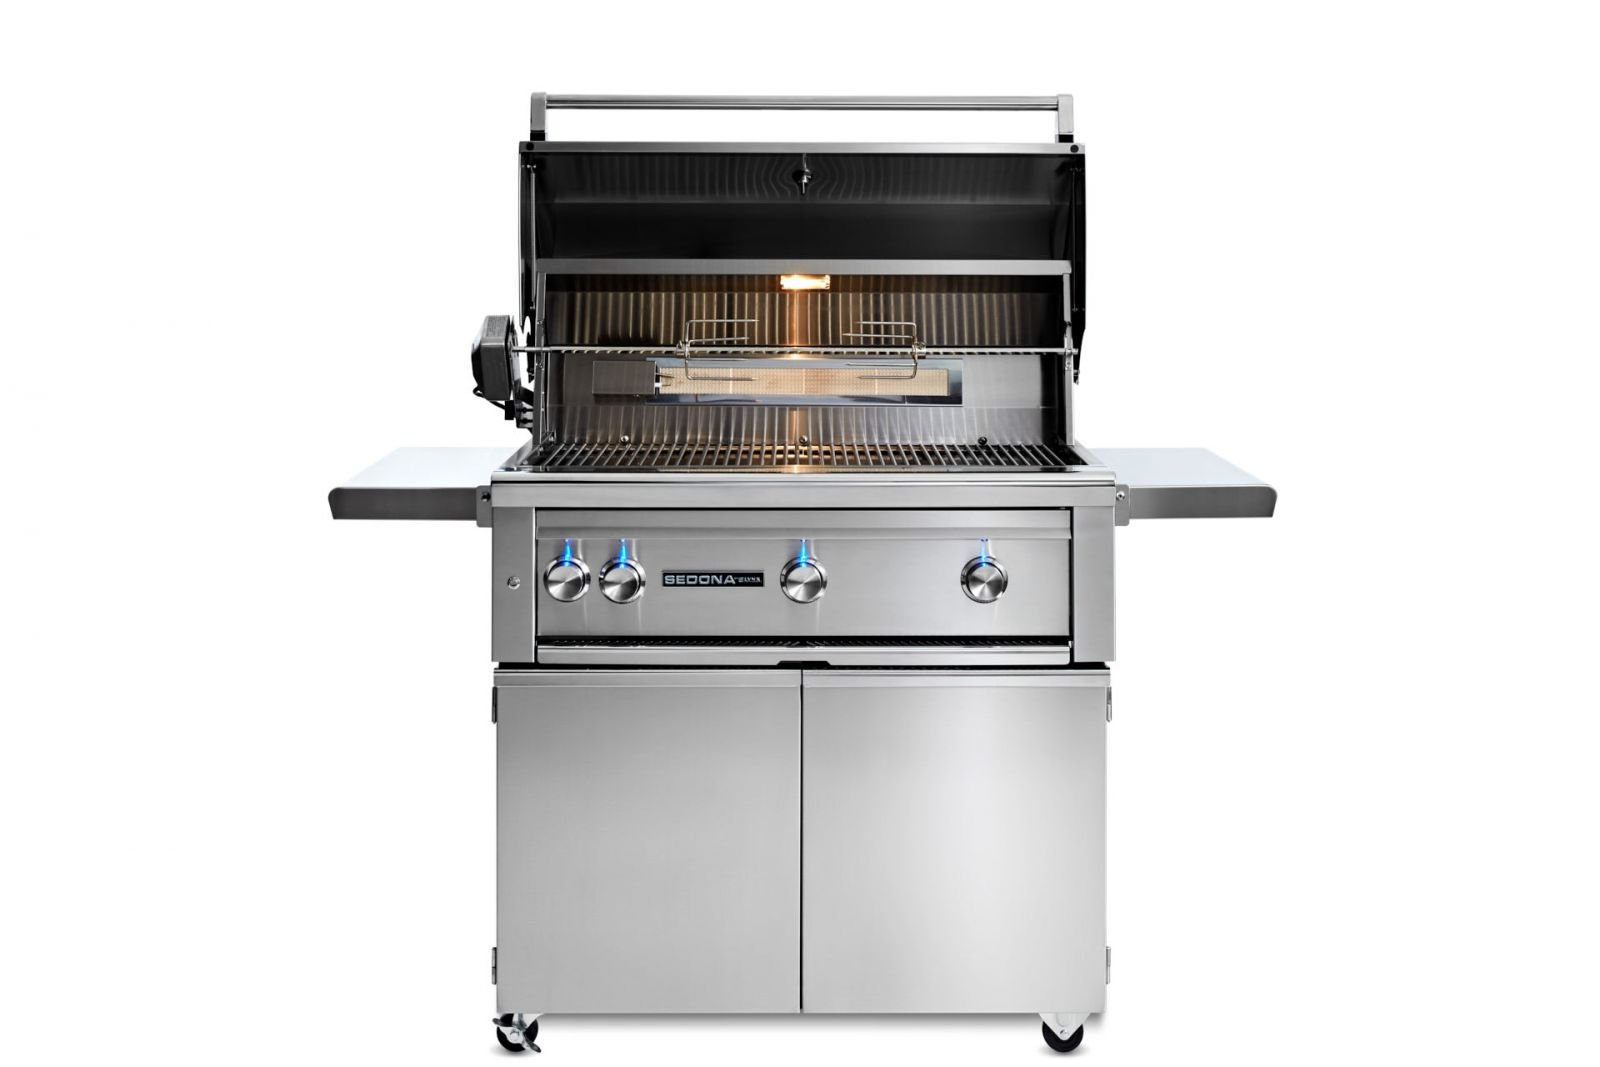 36" Freestanding Grill with 3 Stainless Steel Burners and Rotisserie (L600FR)